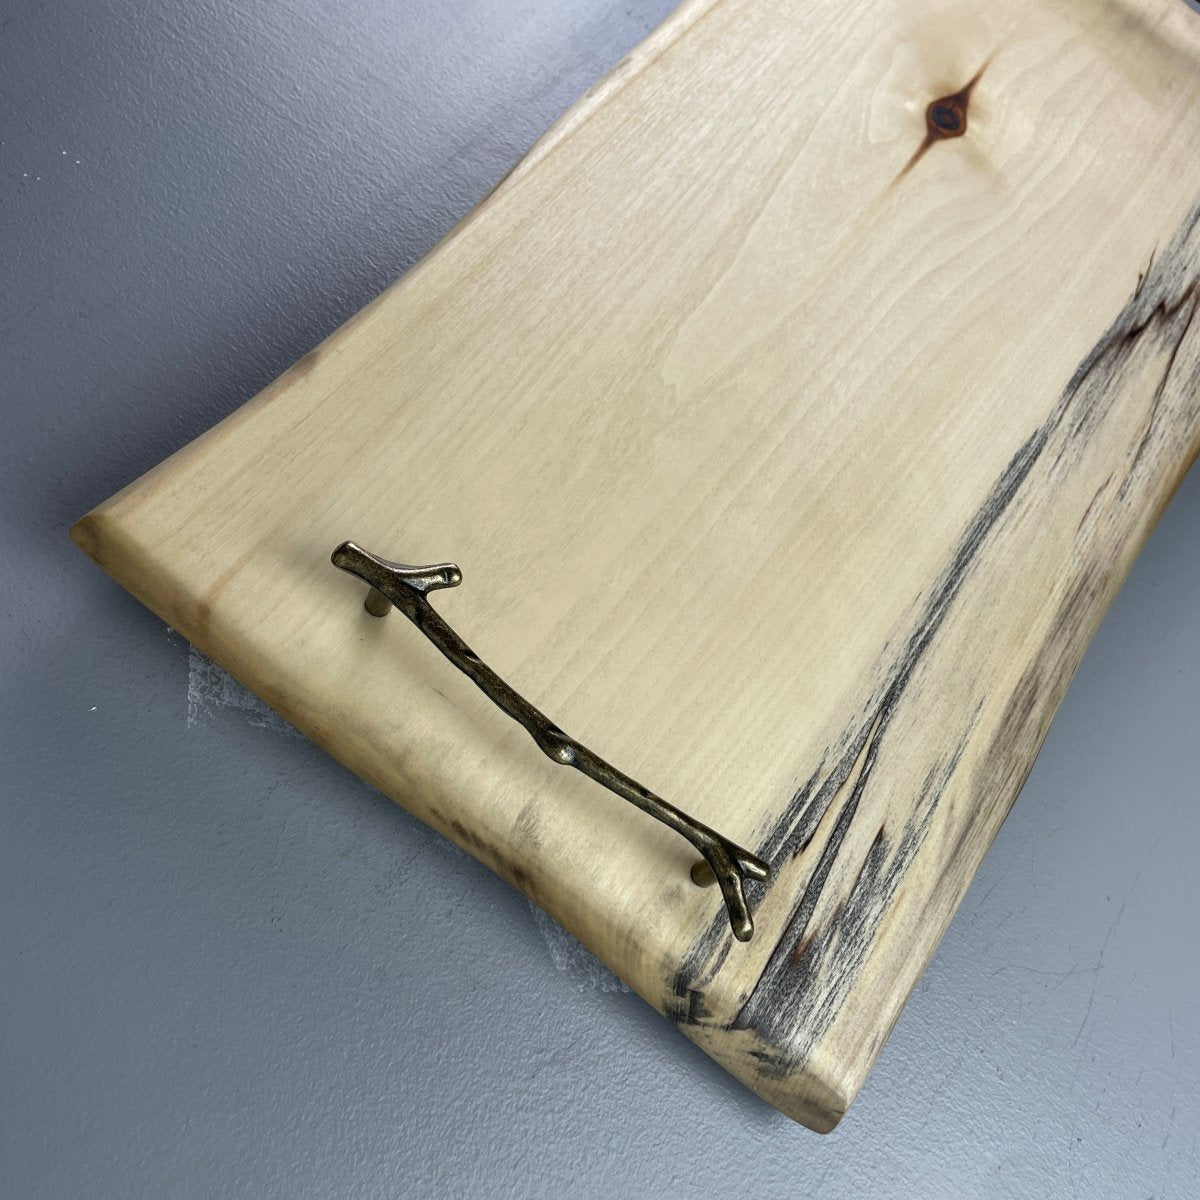 Spalted Maple Charcuterie Board With Antique Brass Handles - DaRosa Creations